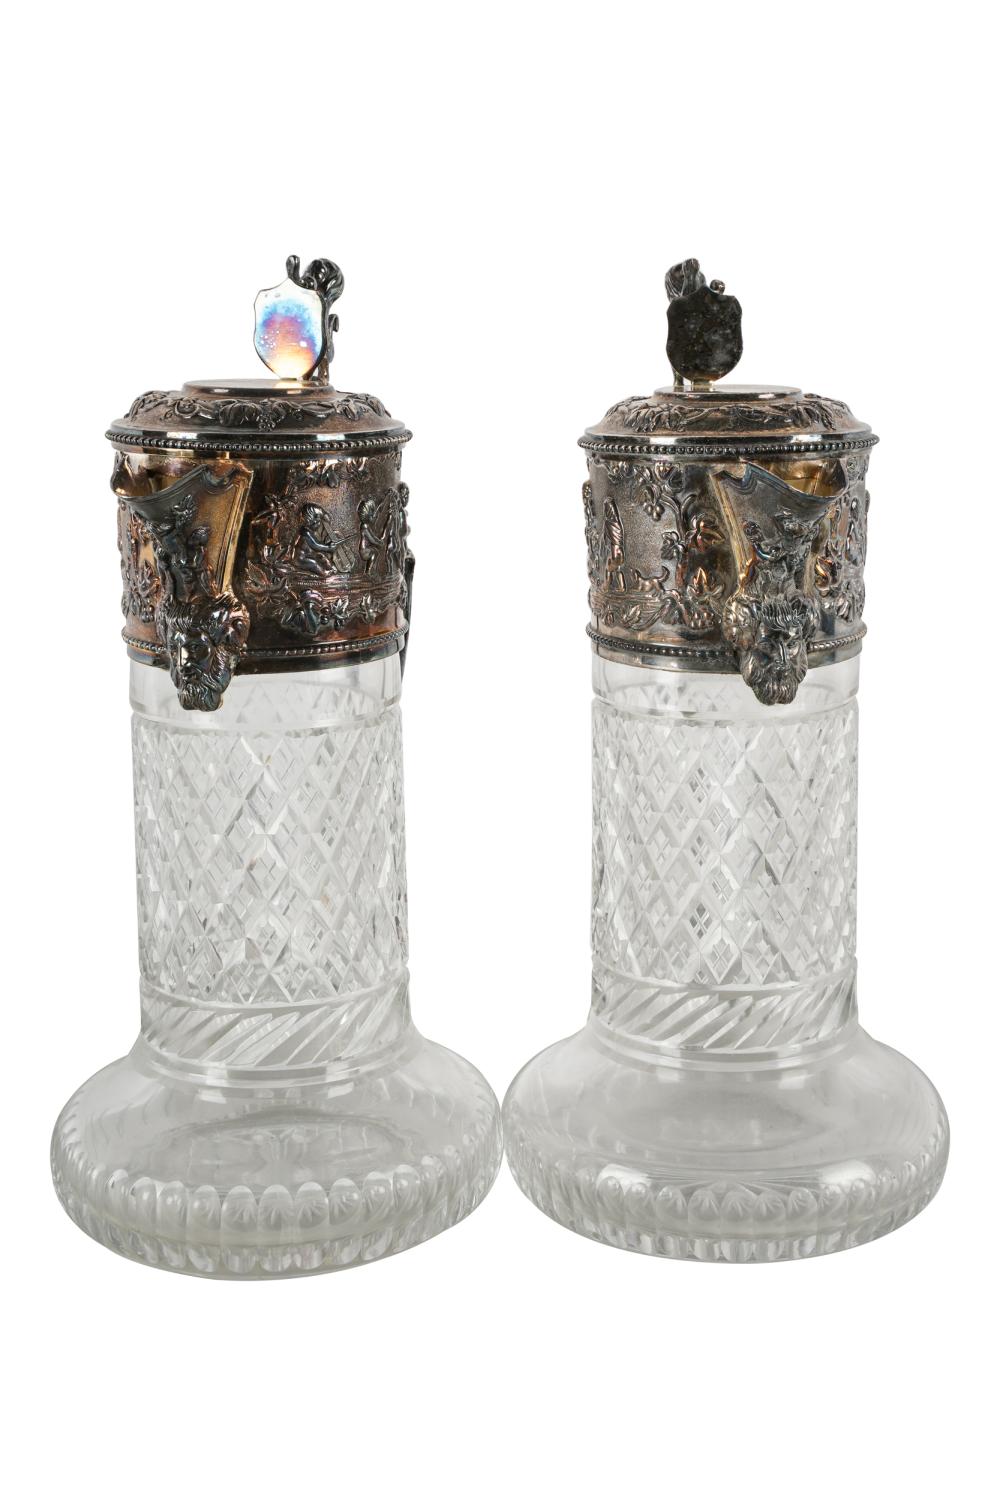 PAIR OF SILVERPLATE & CUT-GLASS